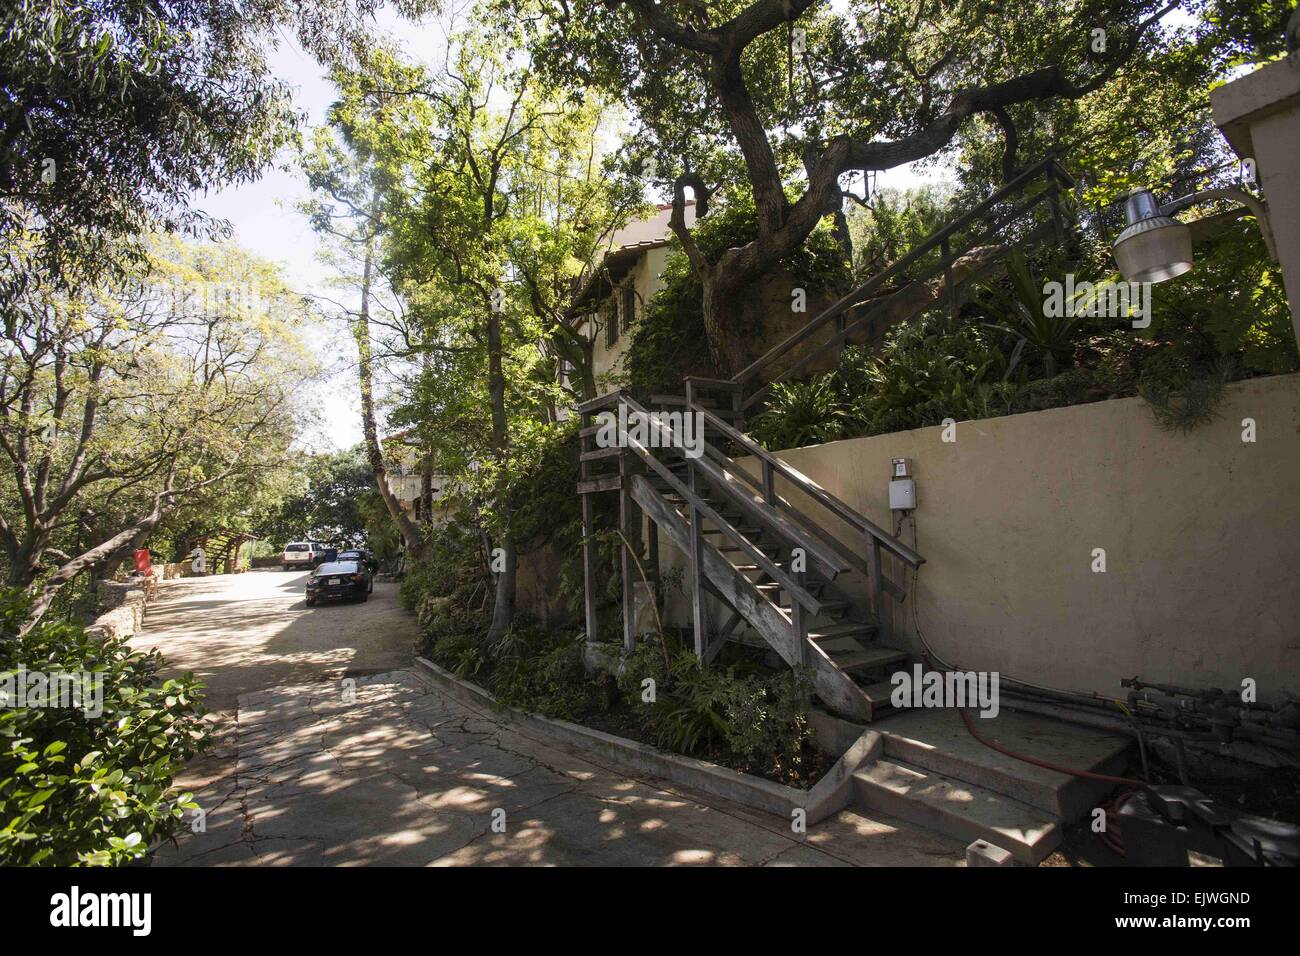 Los Angeles, California, USA. 1st Apr, 2015. The home of Andrew Getty is seen on Wednesday April 1, 2014 in Los Angeles. Getty, the 47-year-old, grandson of the late oil baron J. Paul Getty, who was found dead at his Hollywood Hills home, suffered from a serious medical condition that put him at ''grave risk of substantial and irreparable injury or death'' if his blood pressure were to suddenly rise, according to court papers obtained today. © Ringo Chiu/ZUMA Wire/Alamy Live News Stock Photo